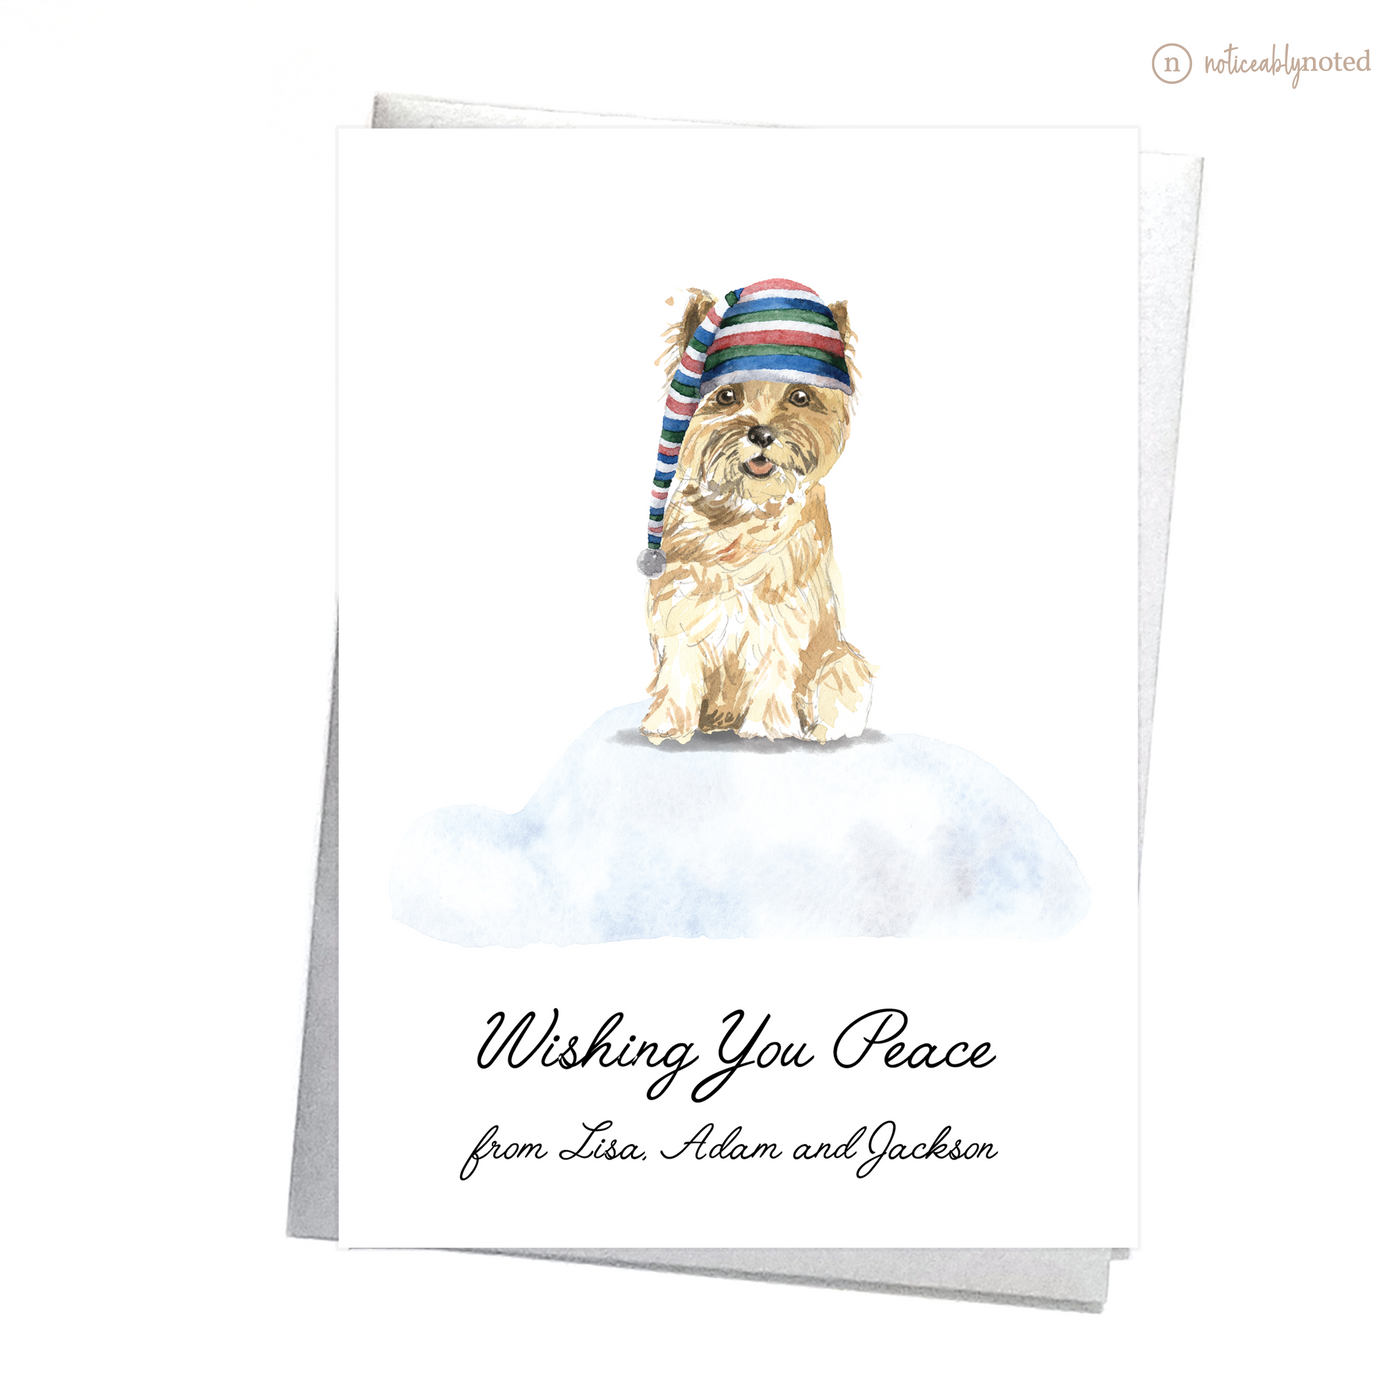 Cairn Terrier Dog Christmas Card | Noticeably Noted